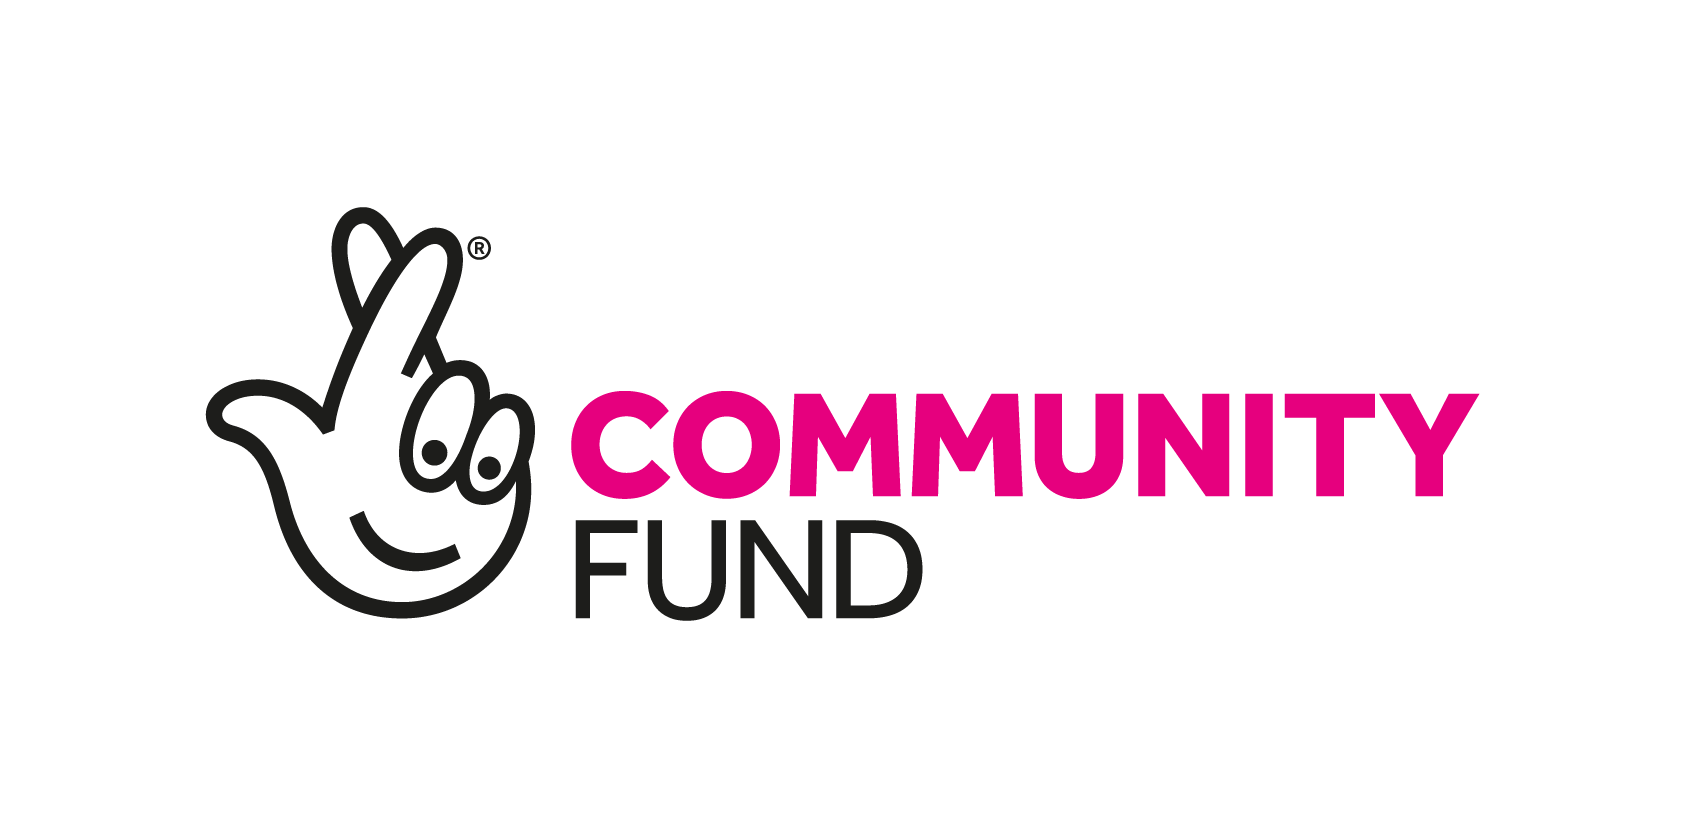 National Lottery Community Fund Grant